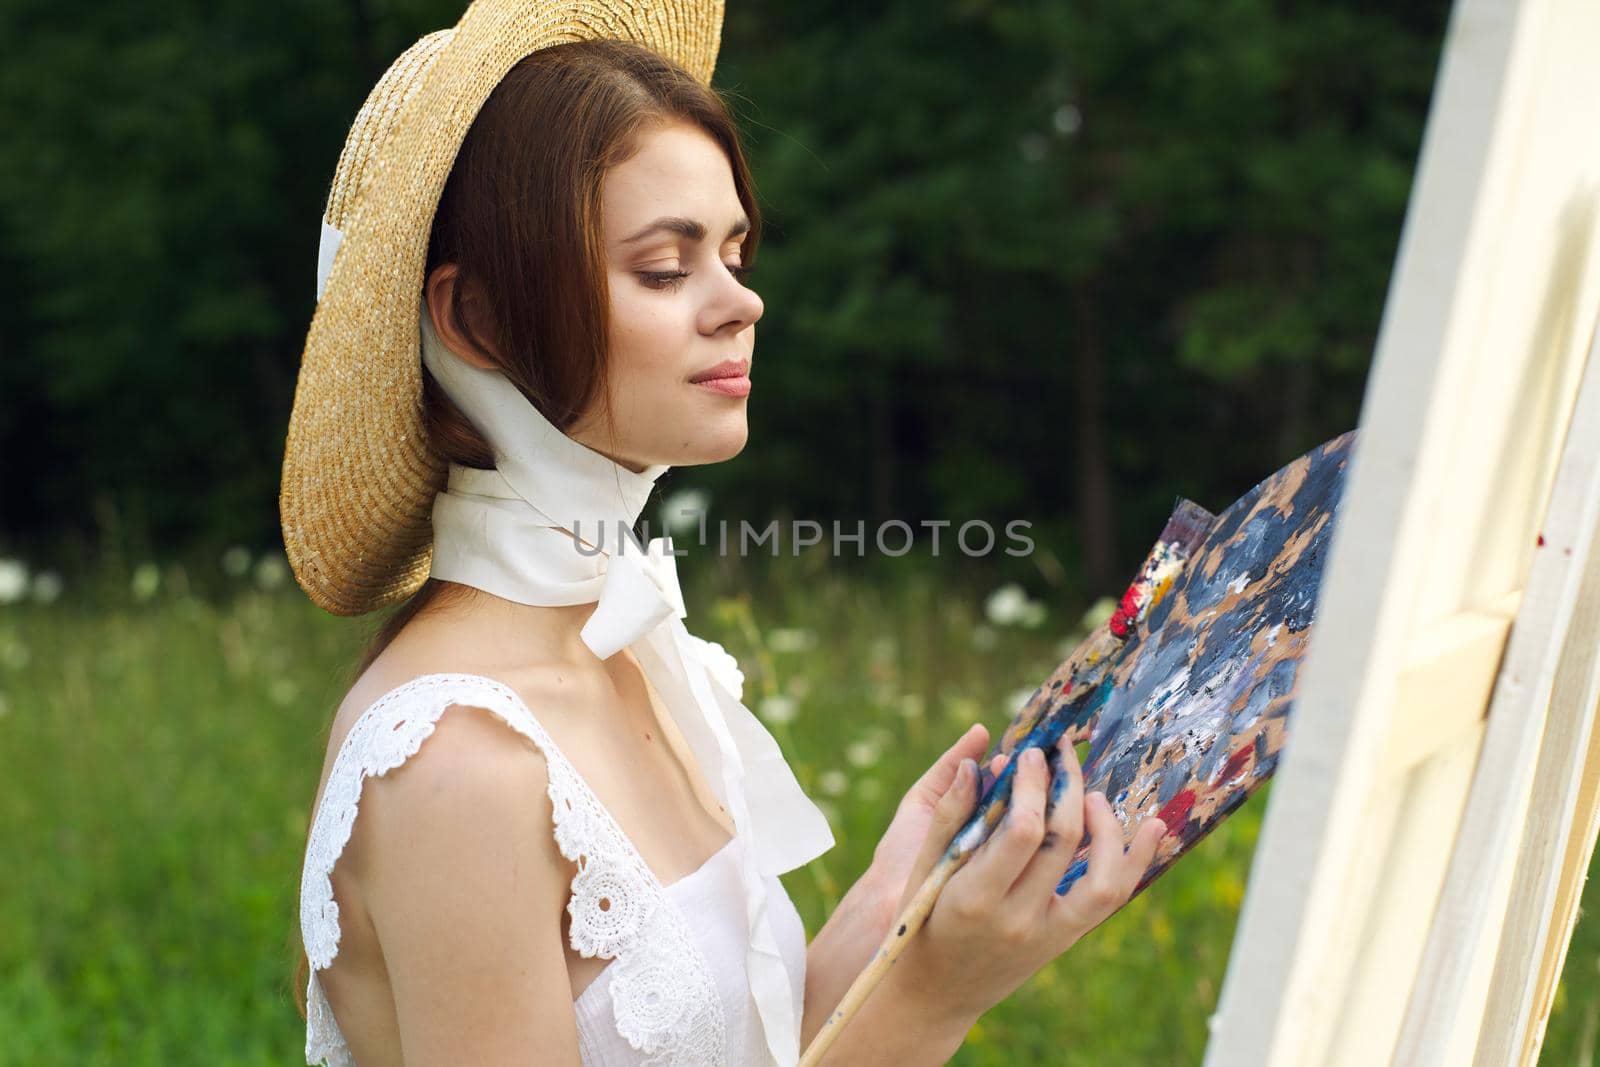 pretty woman in hat artist paints a picture on nature paint. High quality photo